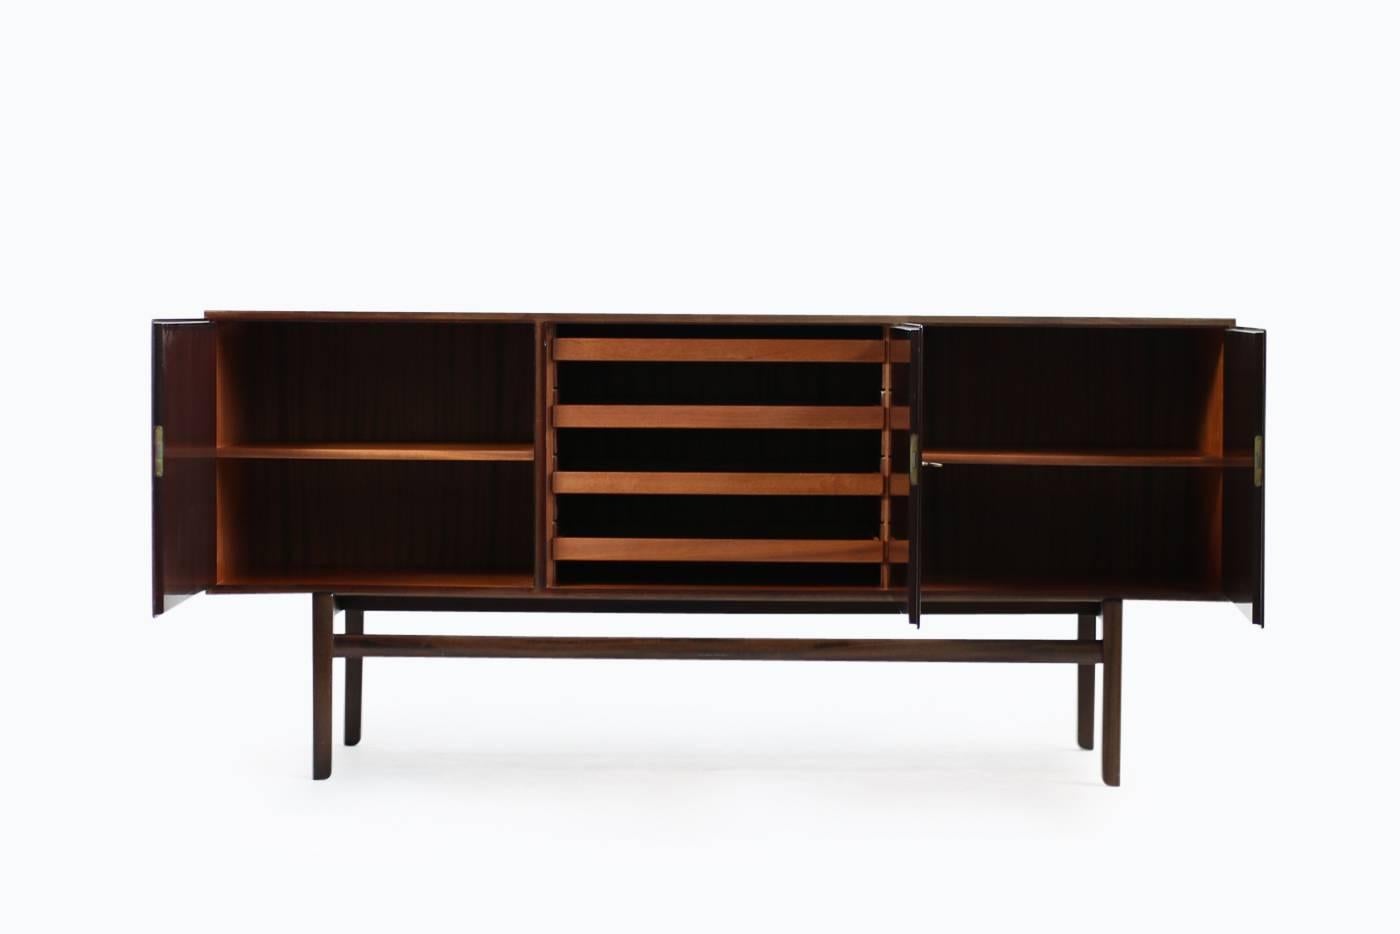 Beautiful 1960s Ole Wanscher sideboard for Poul Jeppesen, Denmark, mahogany, three doors, all keys incl. brass hinges, a matching high board is also available, please check our 1stdibs storefront.
Also available, the matching Ole Wanscher mahogany